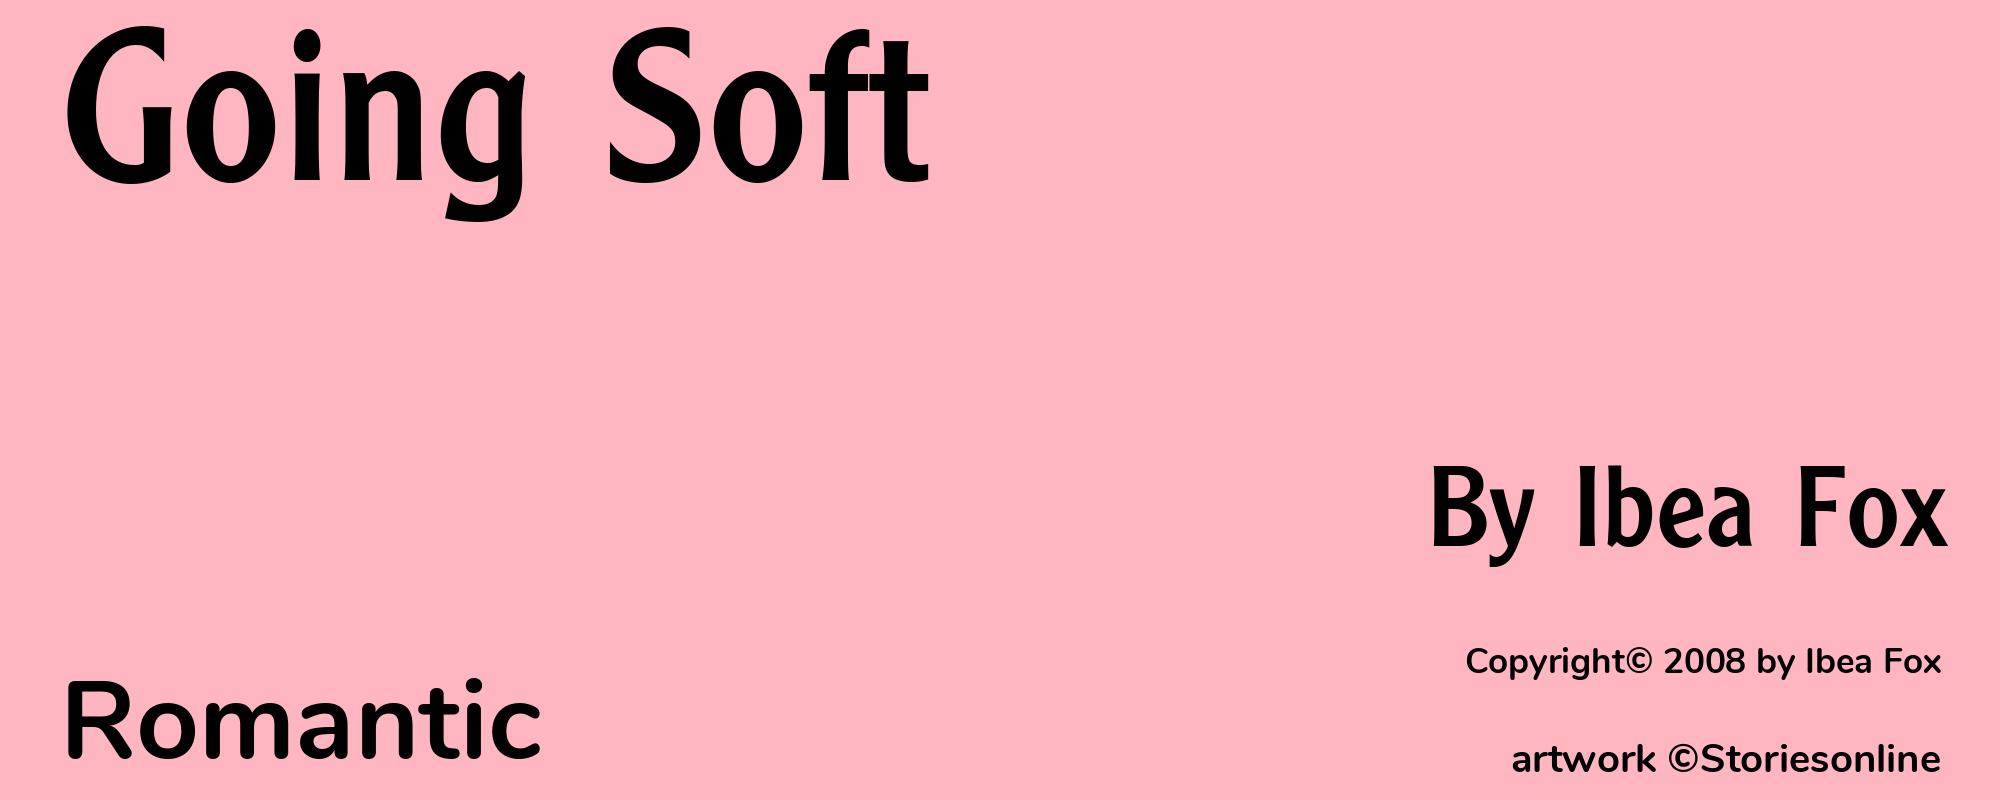 Going Soft - Cover